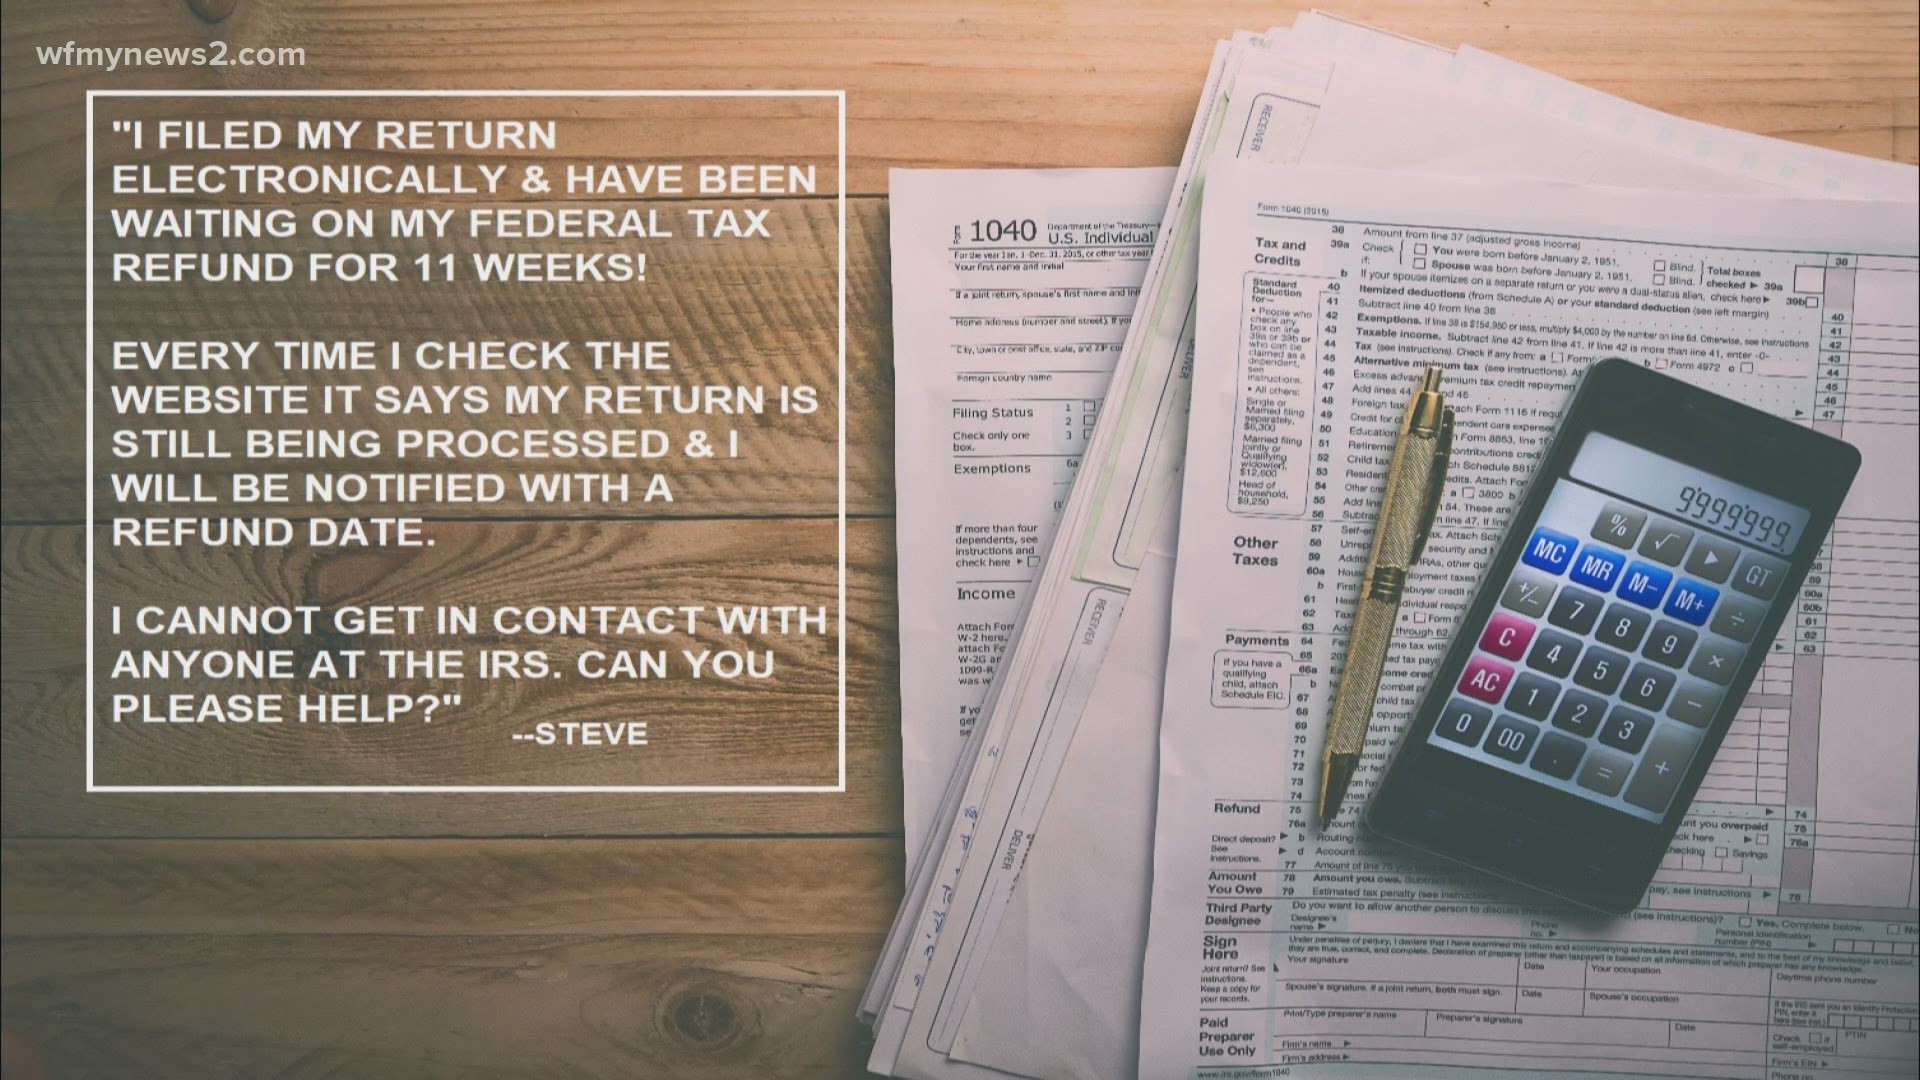 Although it’s nearly impossible to get someone with the IRS on the phone, you can set up an account with them online.